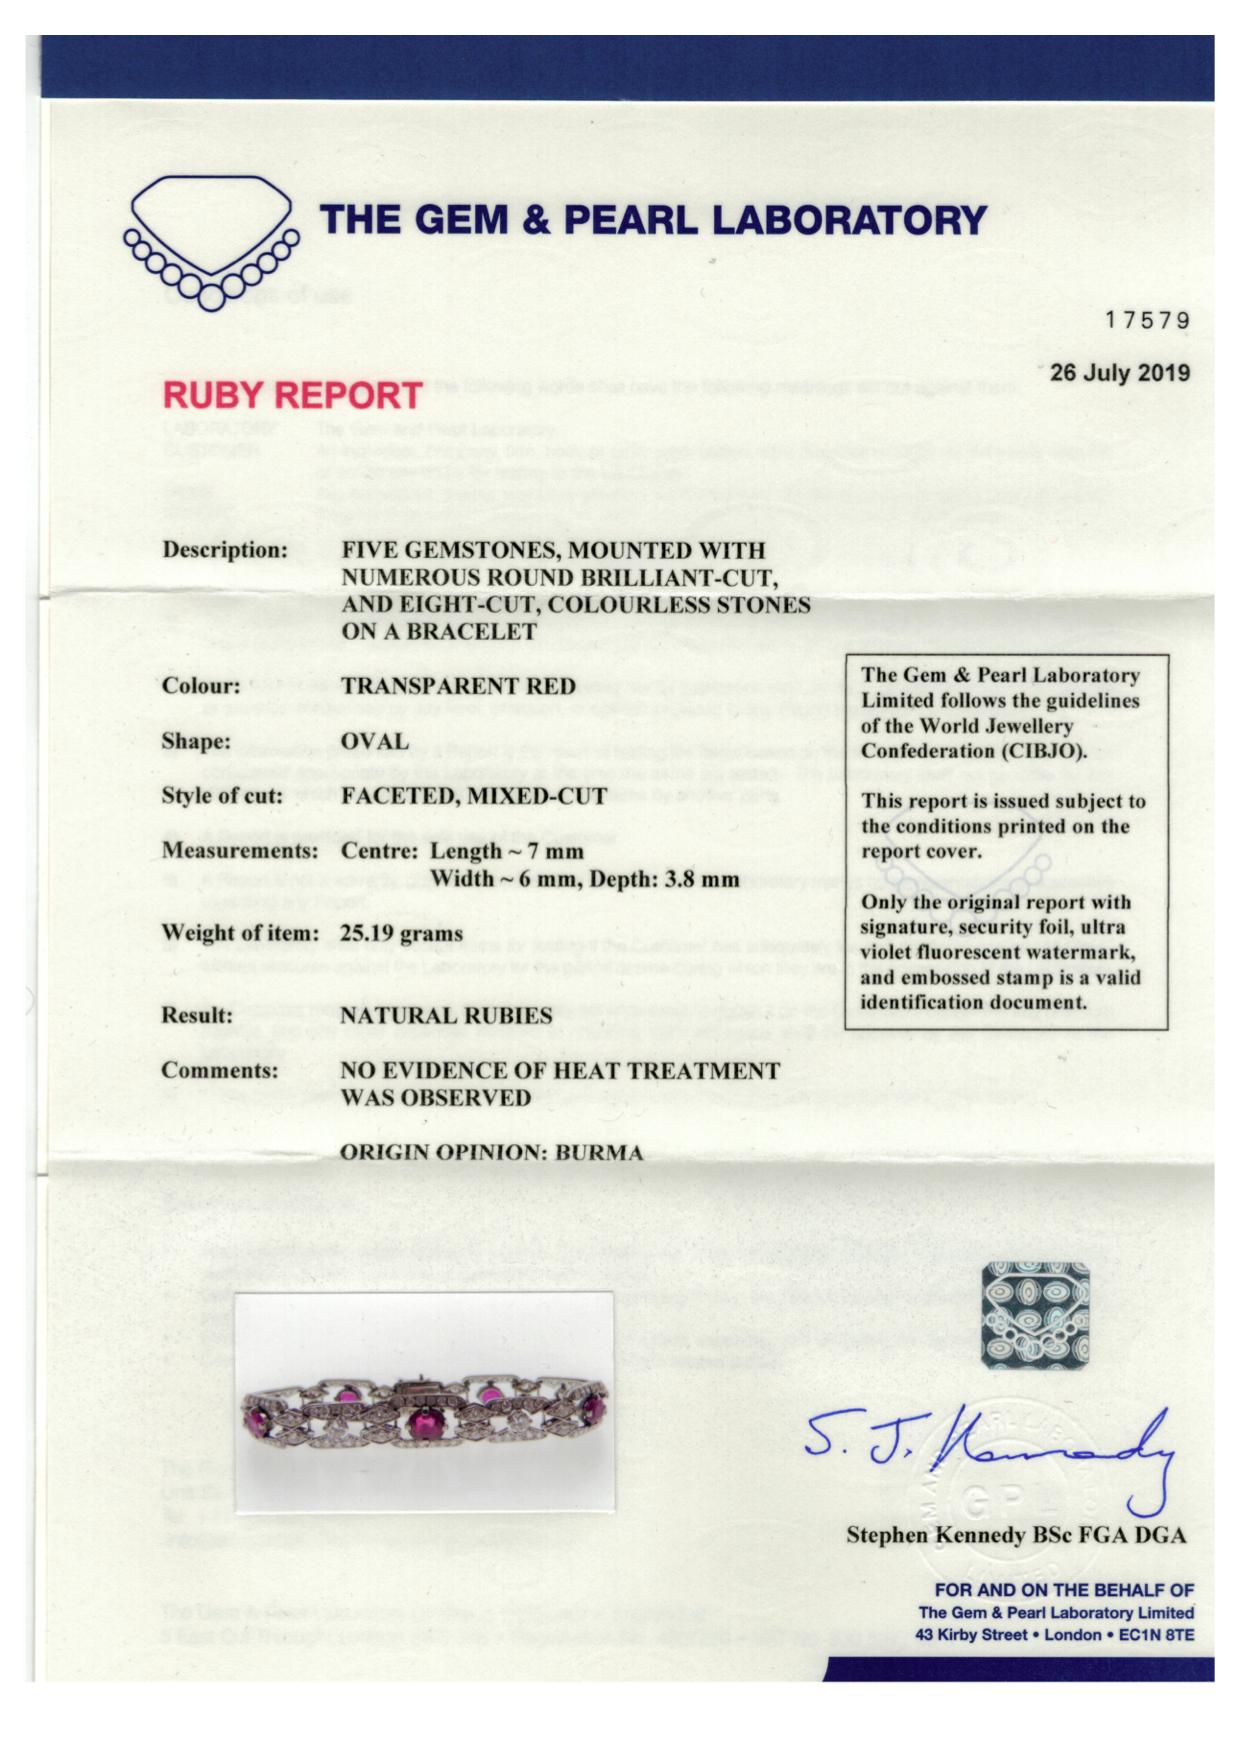 A 1920's Certificated Burmese Ruby and Diamond Bracelet
The bracelet comprises of 5 certificated Burmese rubies of approximately 5 carats. The rubies have been certificated by the Gem and Pearl Laboratory of Great Britain.
There are a further 5